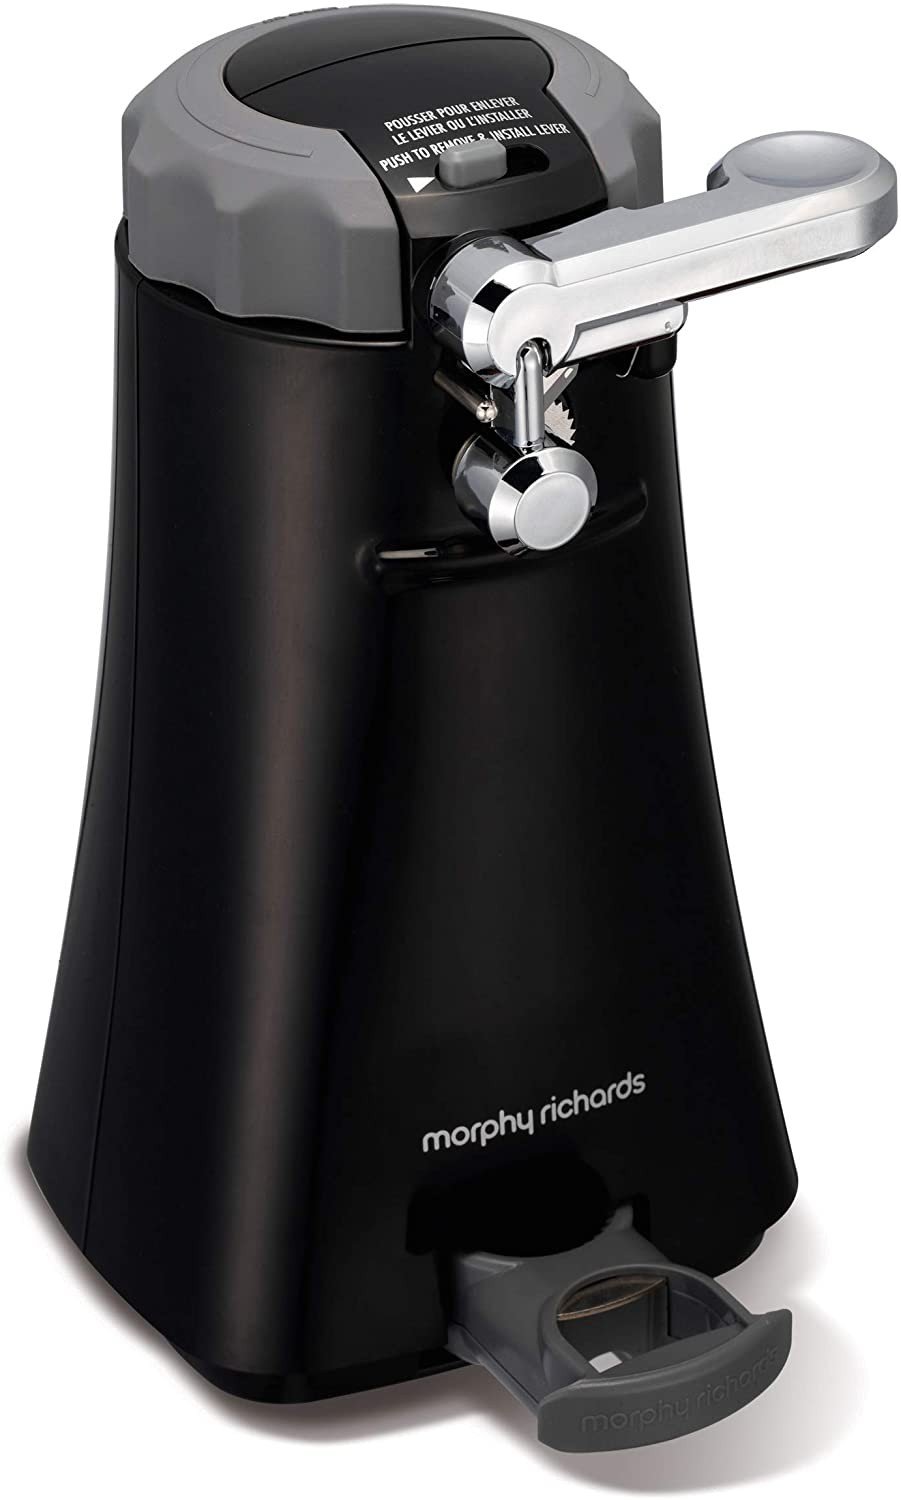 Hamilton Beach - OpenStation Can Opener with Tools - Black